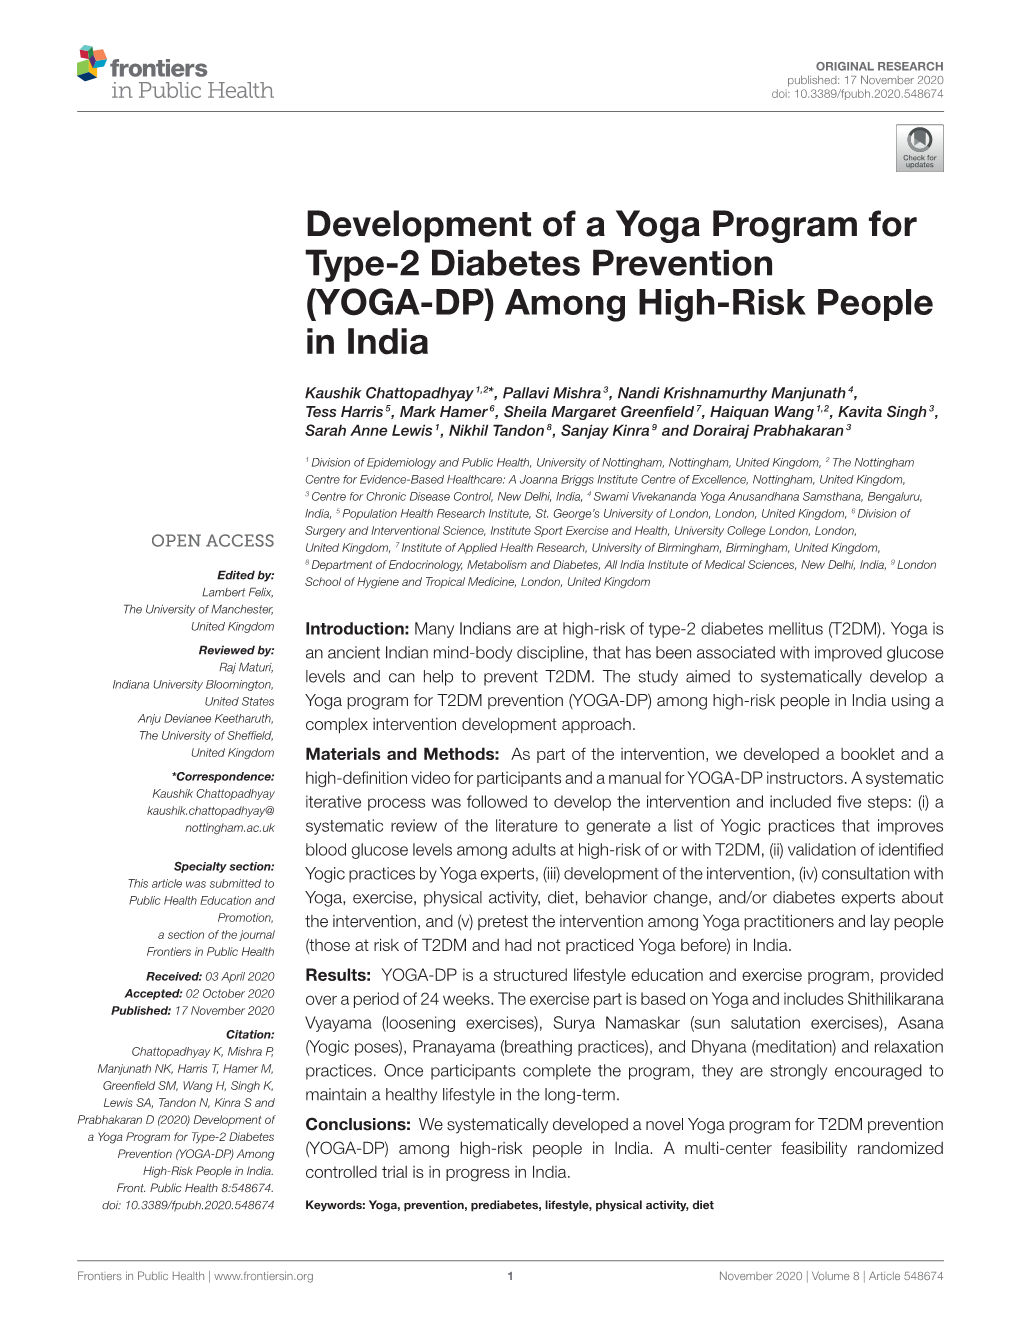 Development of a Yoga Program for Type-2 Diabetes Prevention (YOGA-DP) Among High-Risk People in India